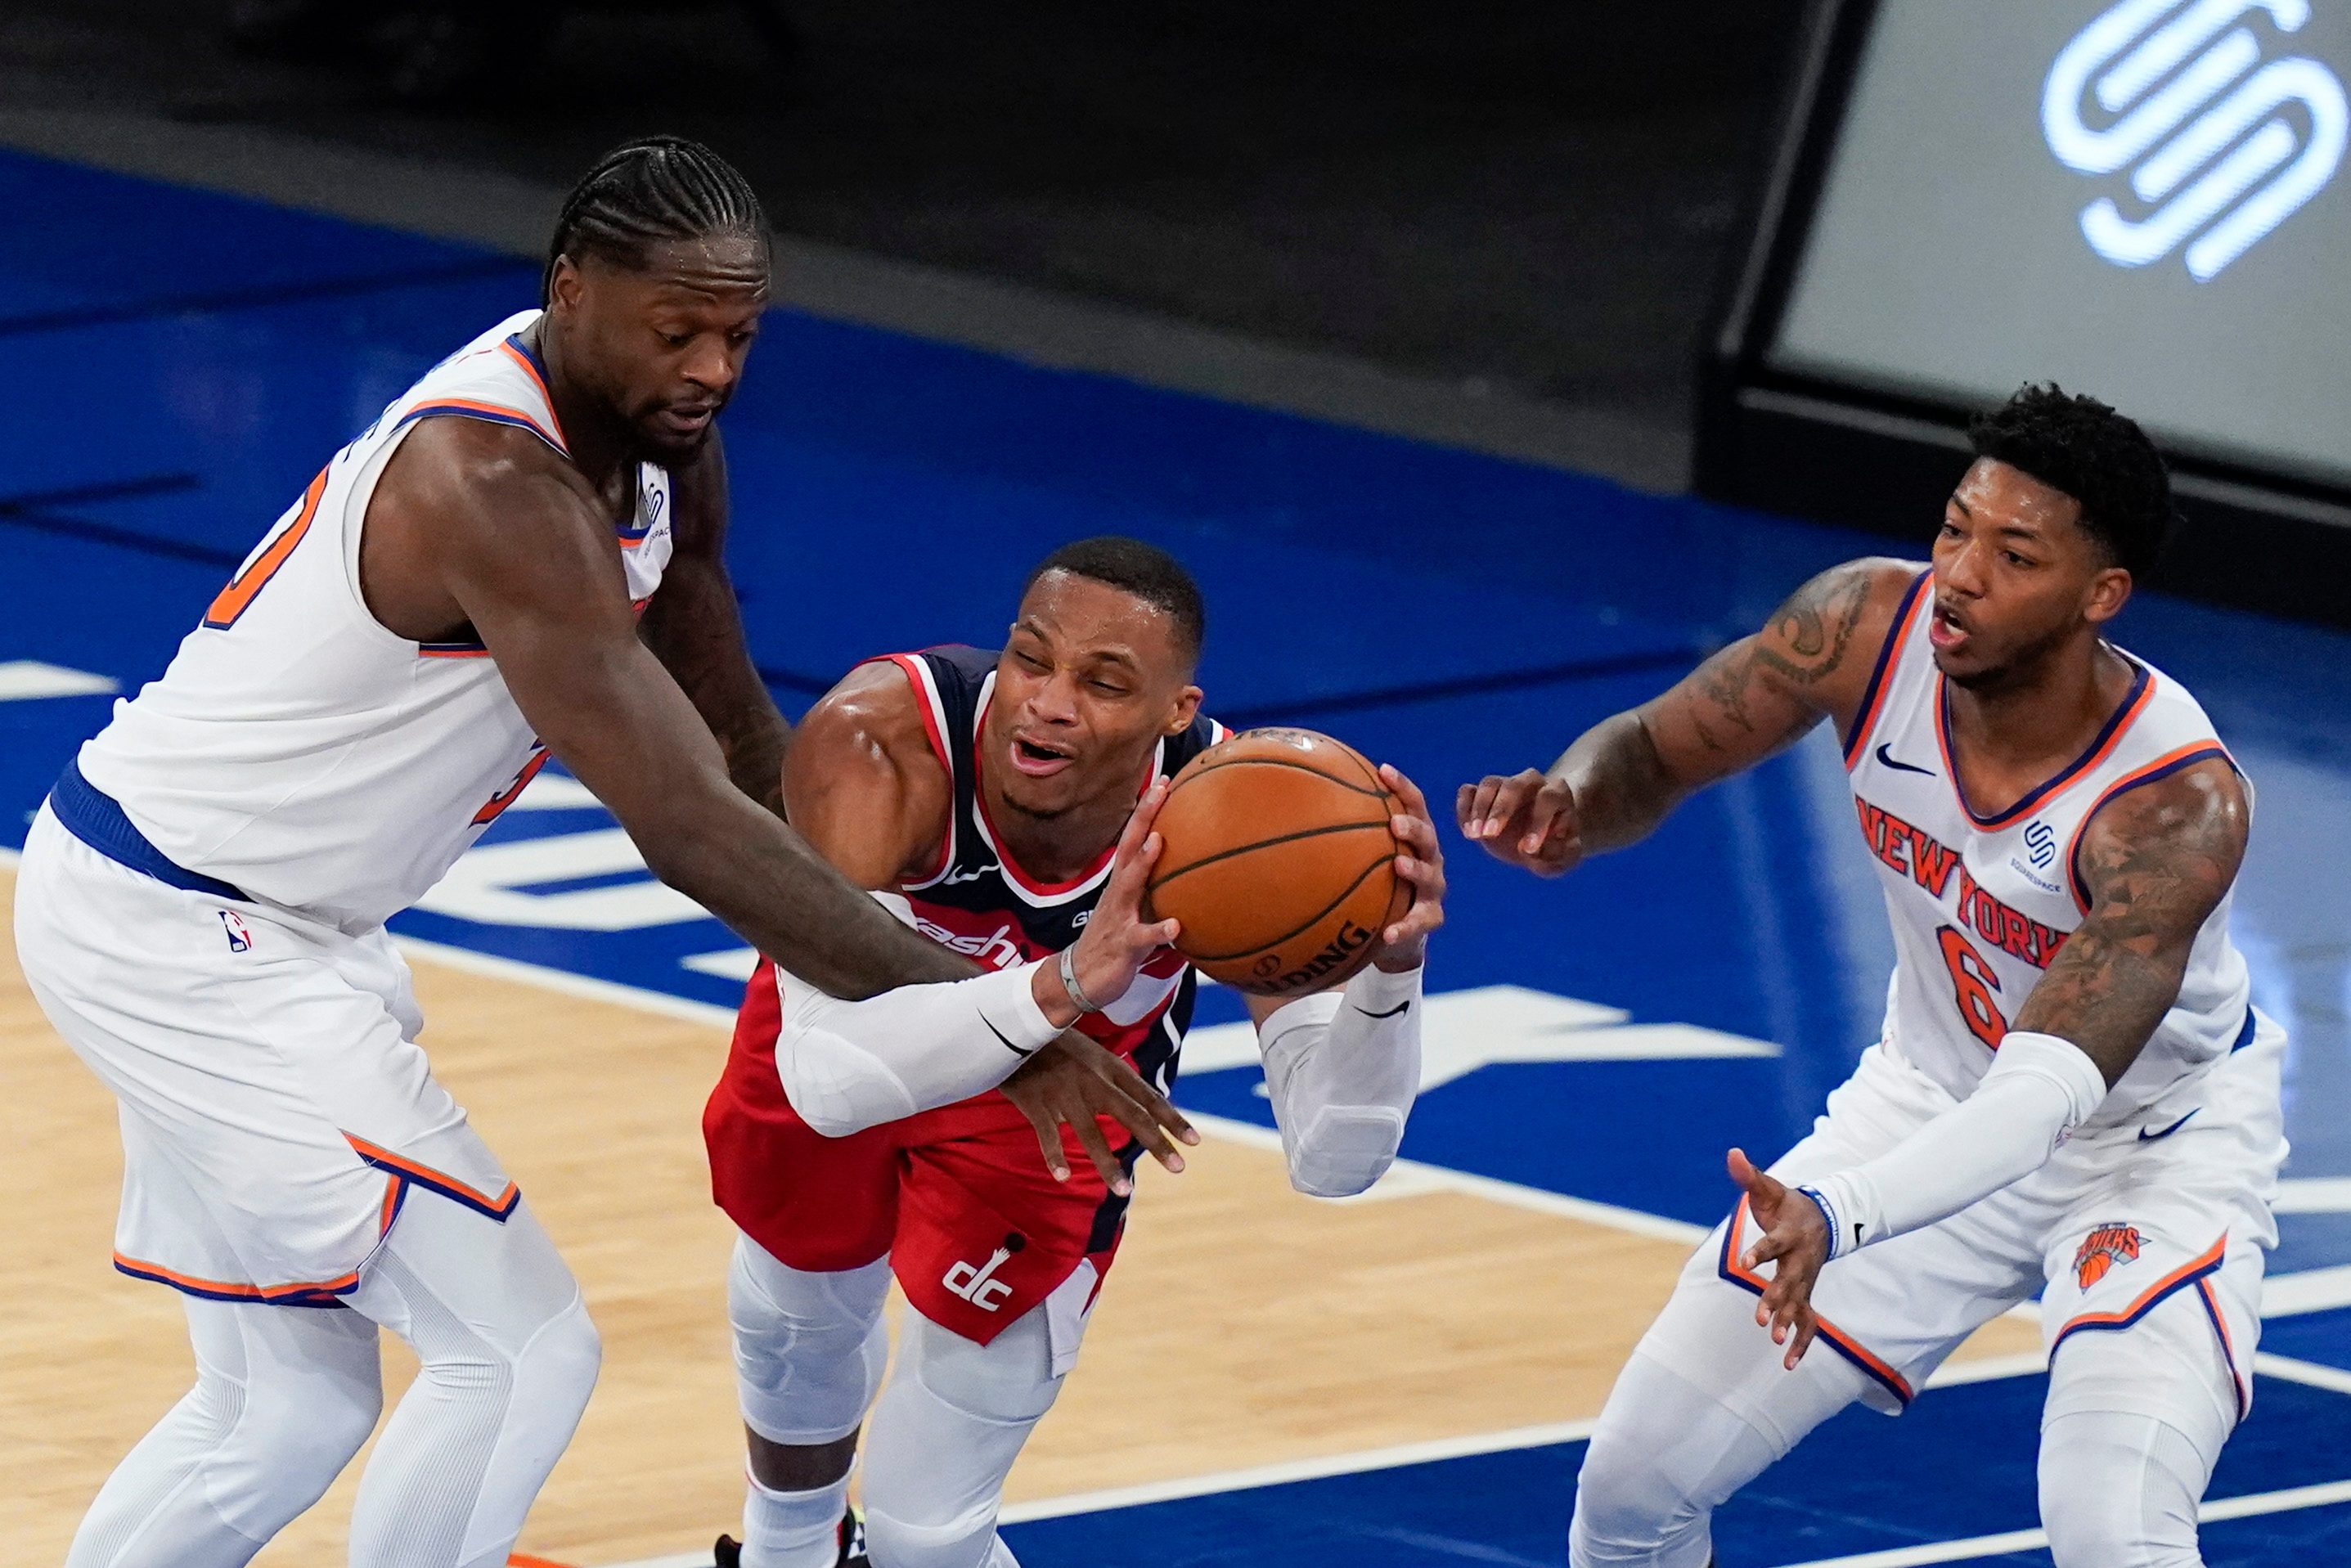 Knicks rally from 17-point deficit to edge Westbrook, Wizards